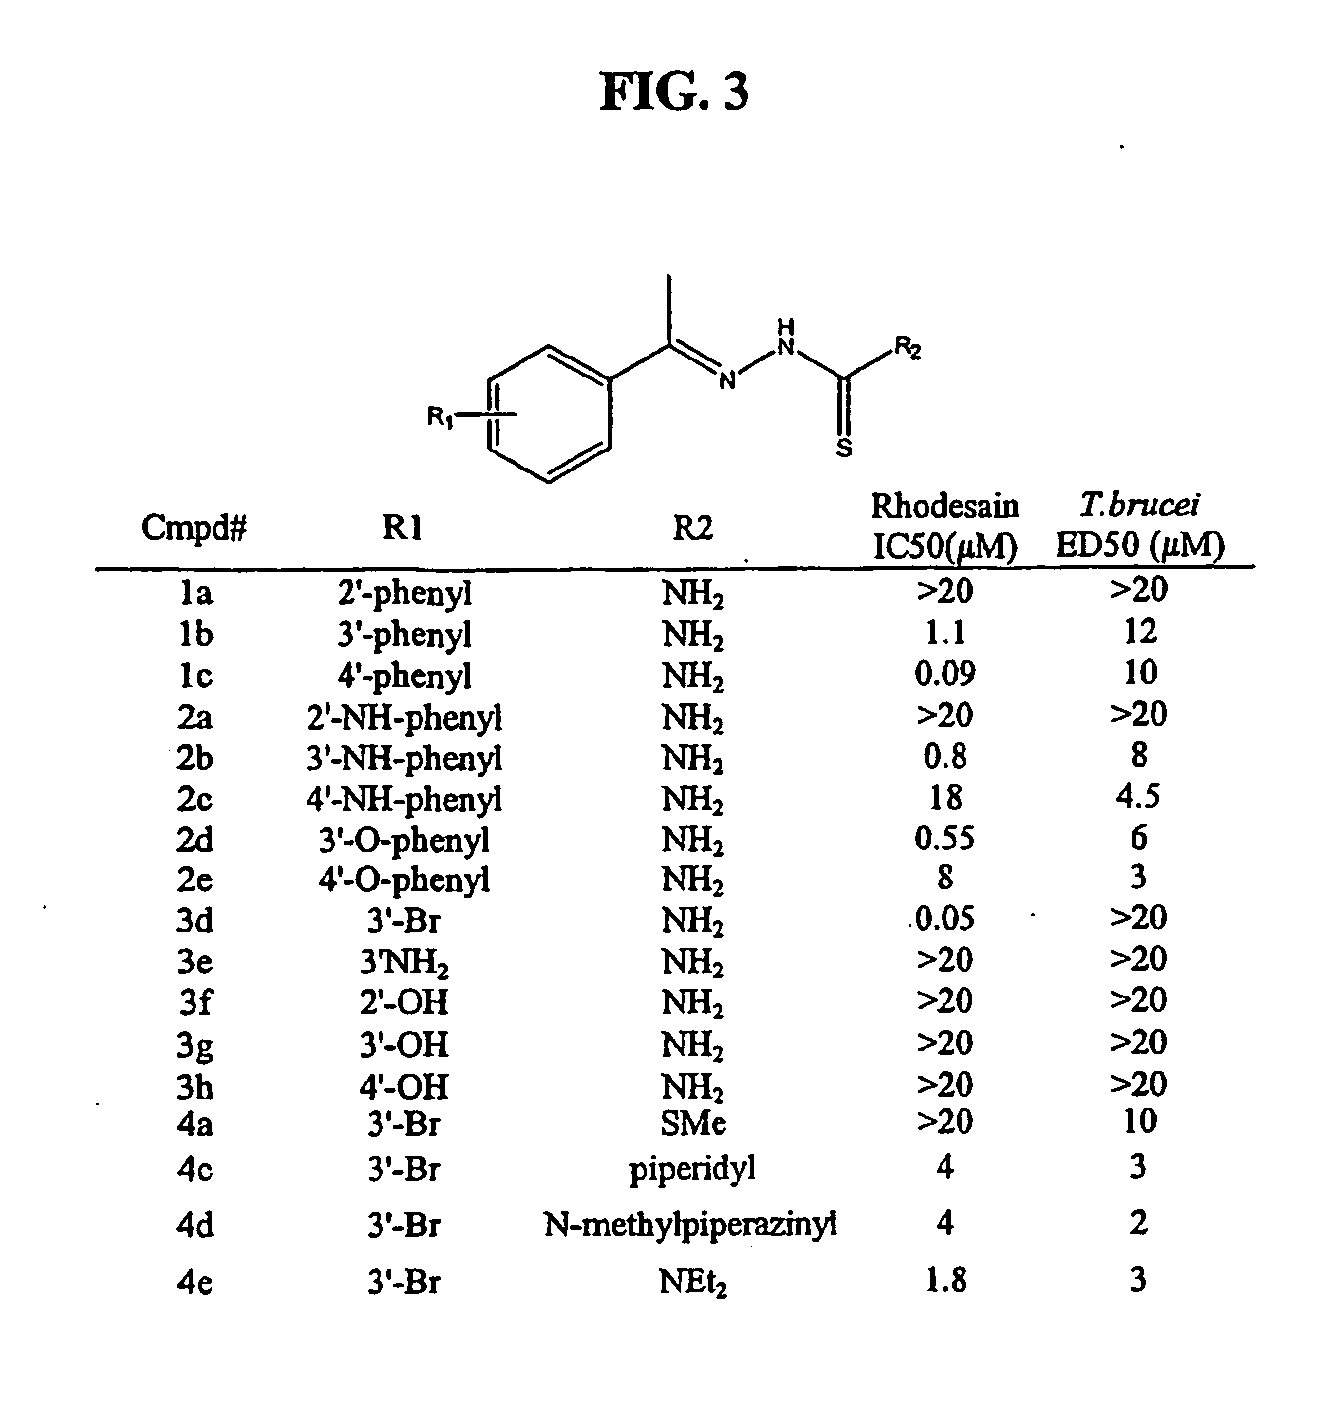 Anti-parasitic compounds and methods of their use